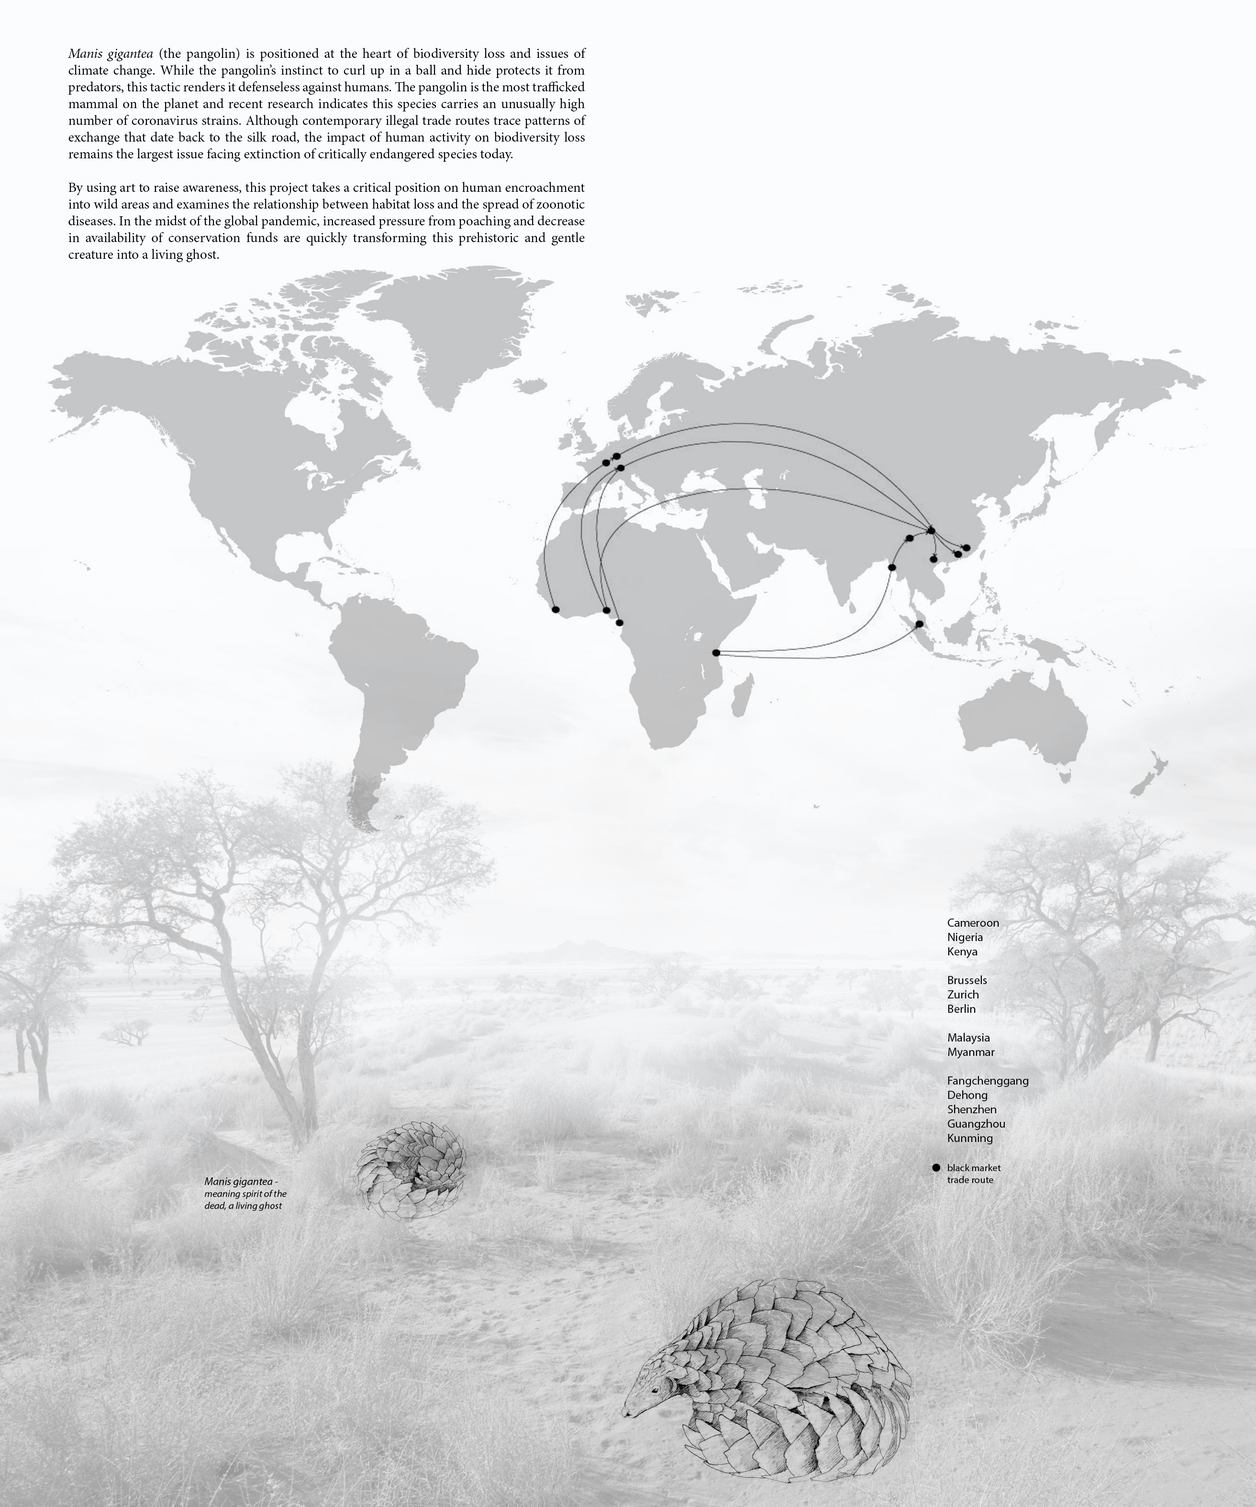 Introduction to Pangolin habitat loss and relationship with global transport networks